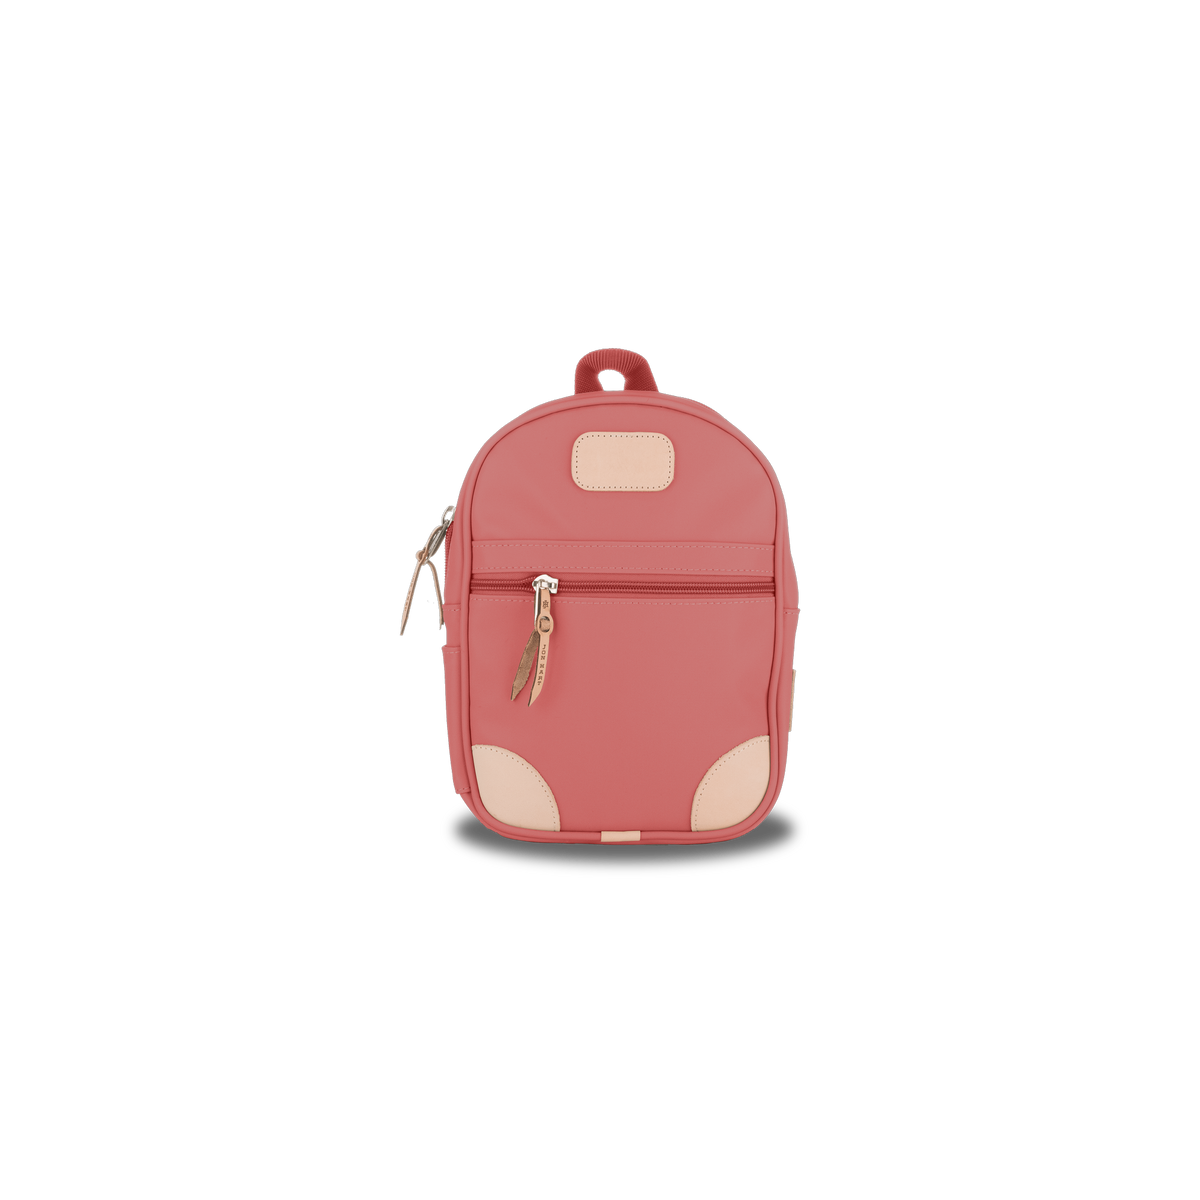 Mini Backpack - the-attic-boutique-and-gift